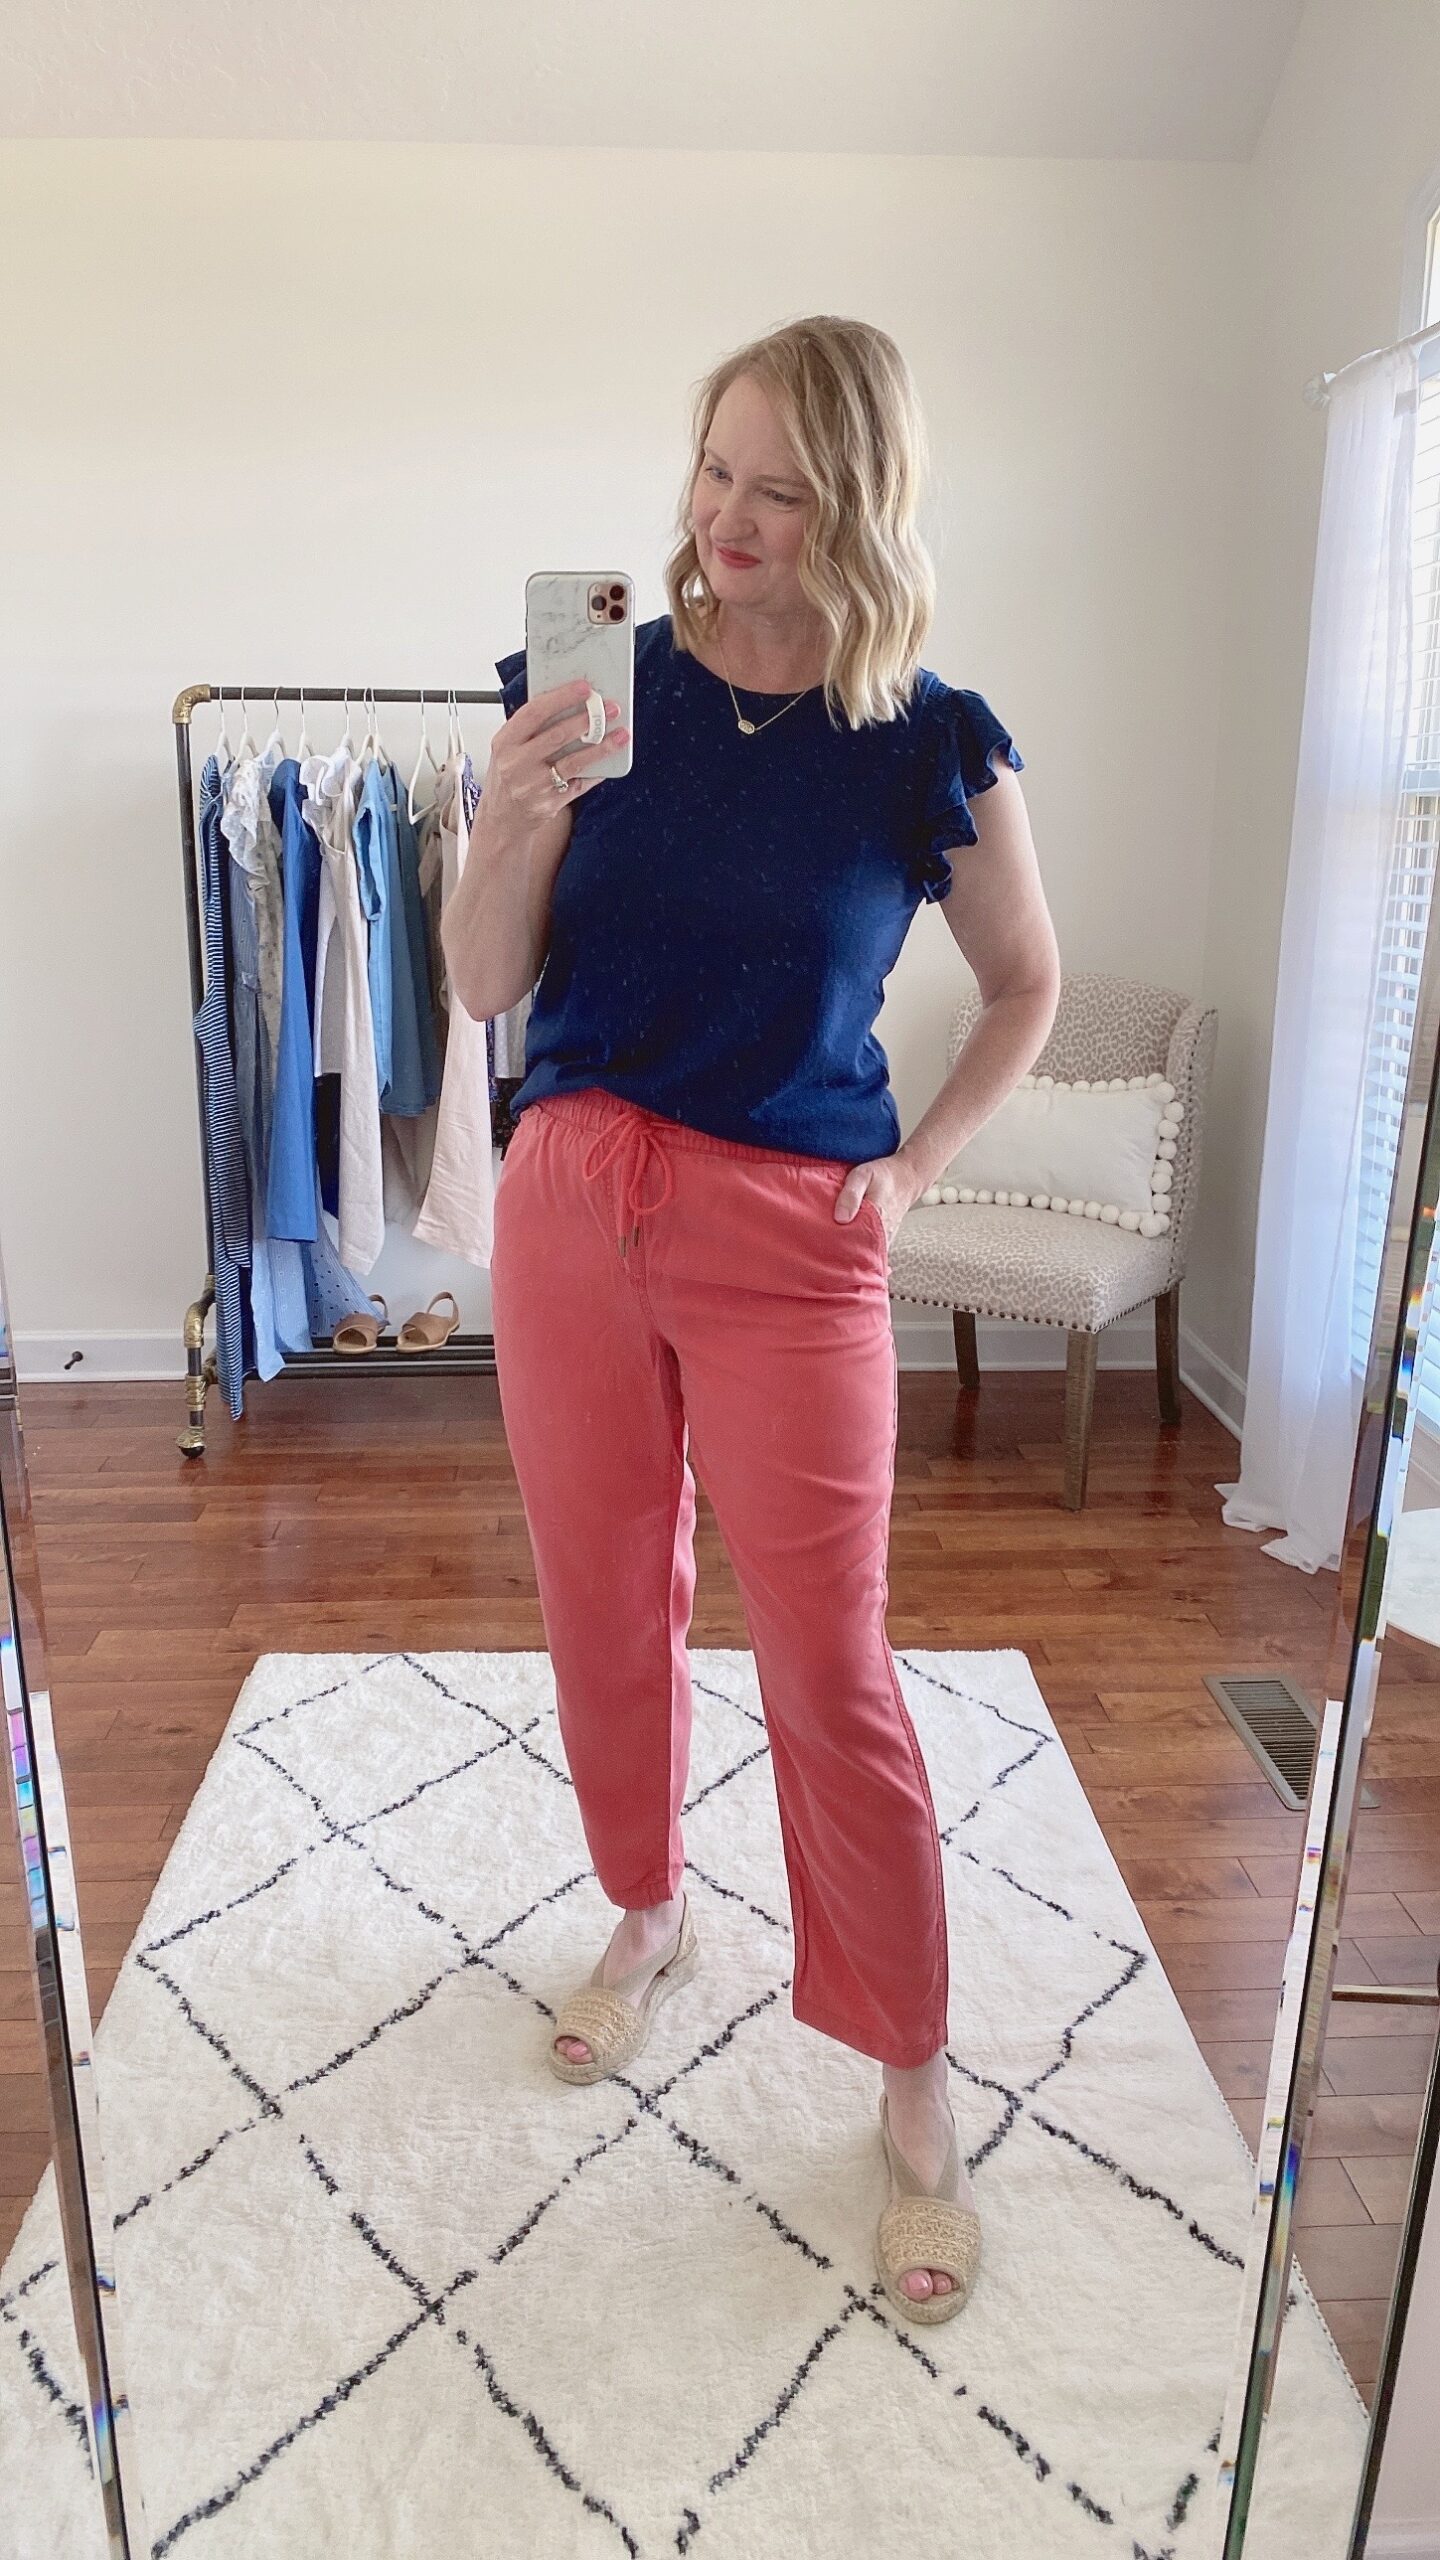 LOFT NORDSTROM NISOLO TRY ON OUTFIT - NAVY TOP CORAL BOTTOMS